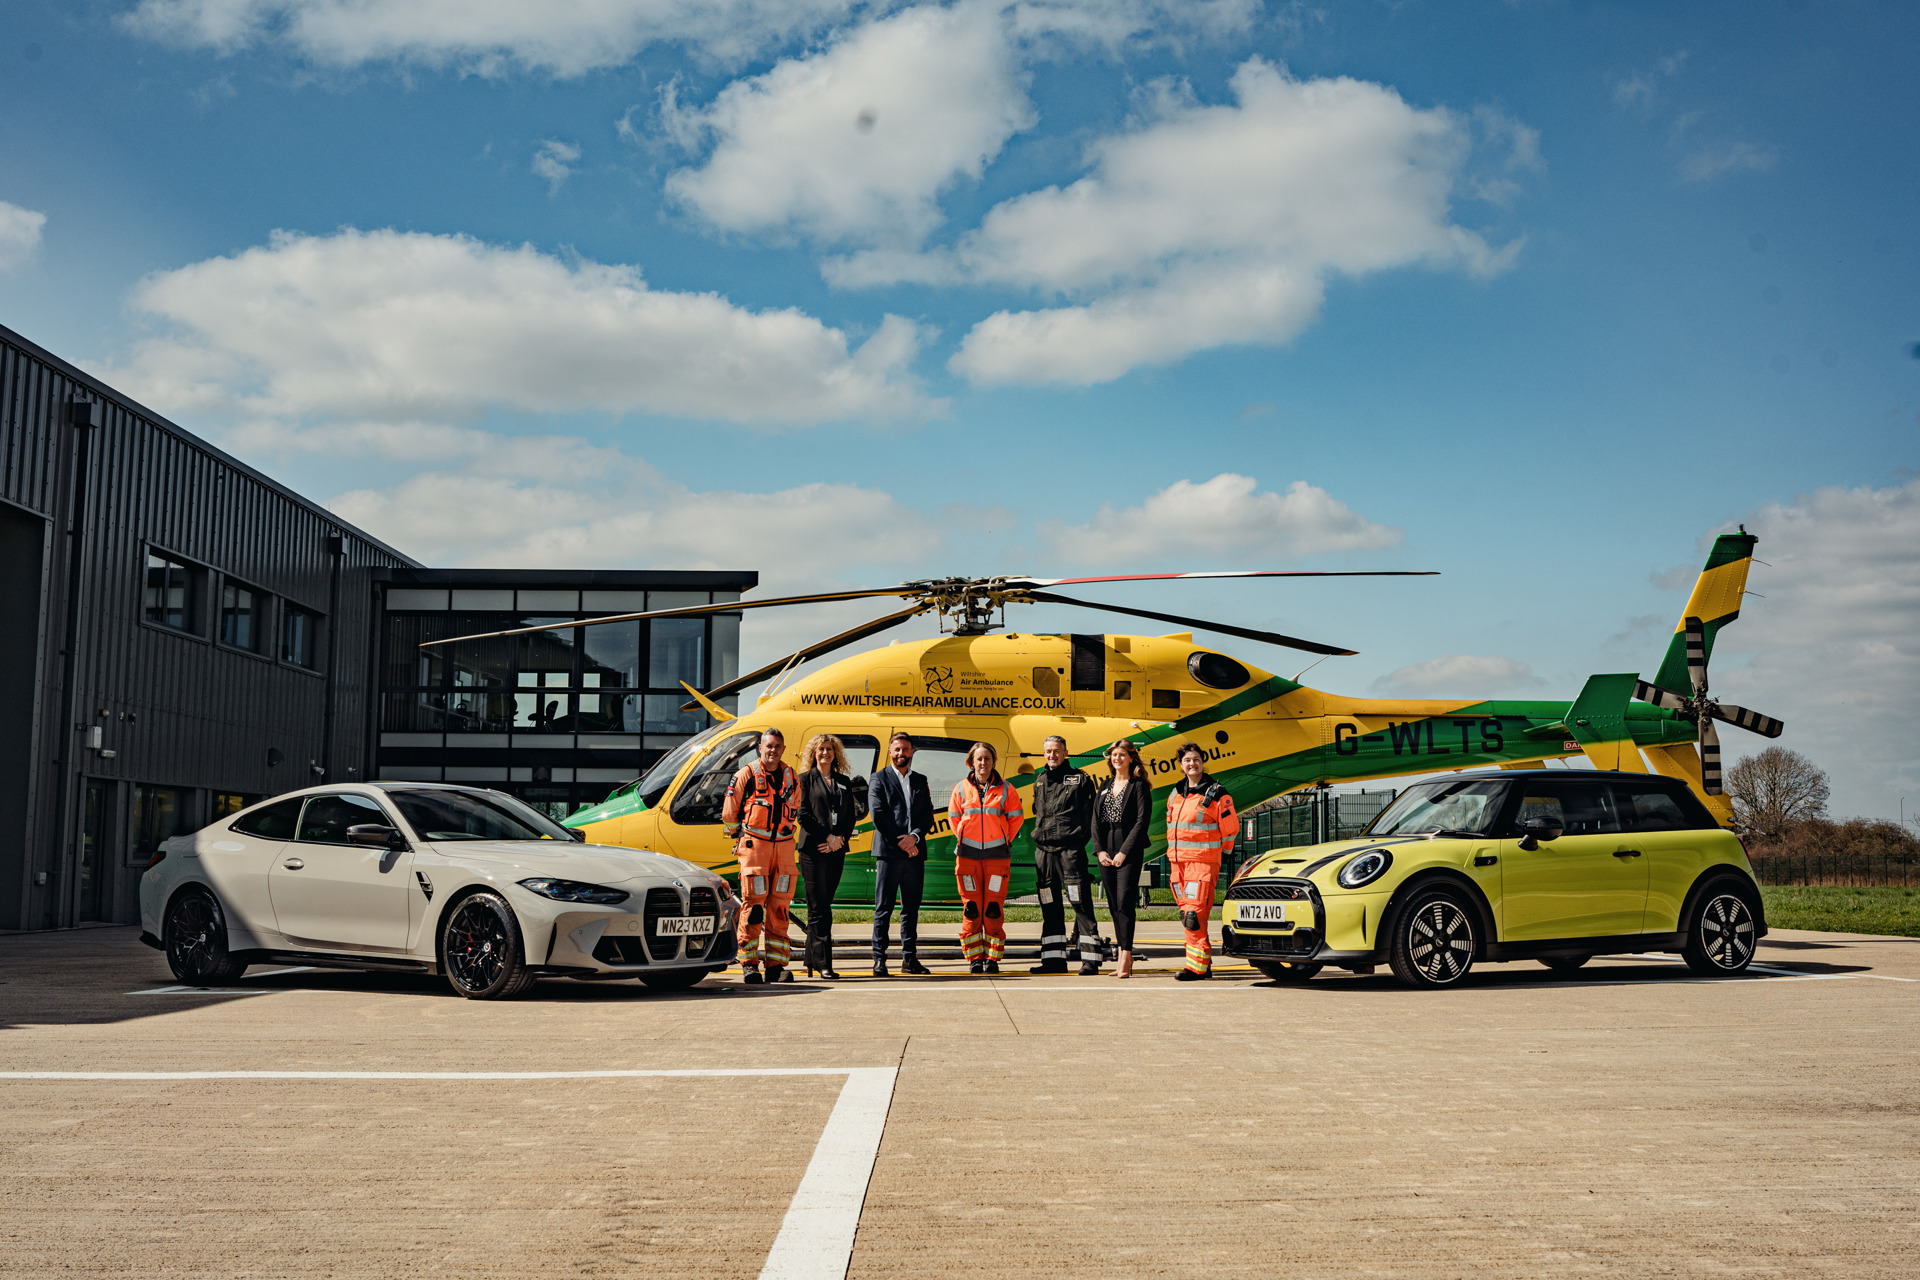 The Wiltshire Air Ambulance helicopter on the helipad with a yellow mini and grey BMW parked alongside